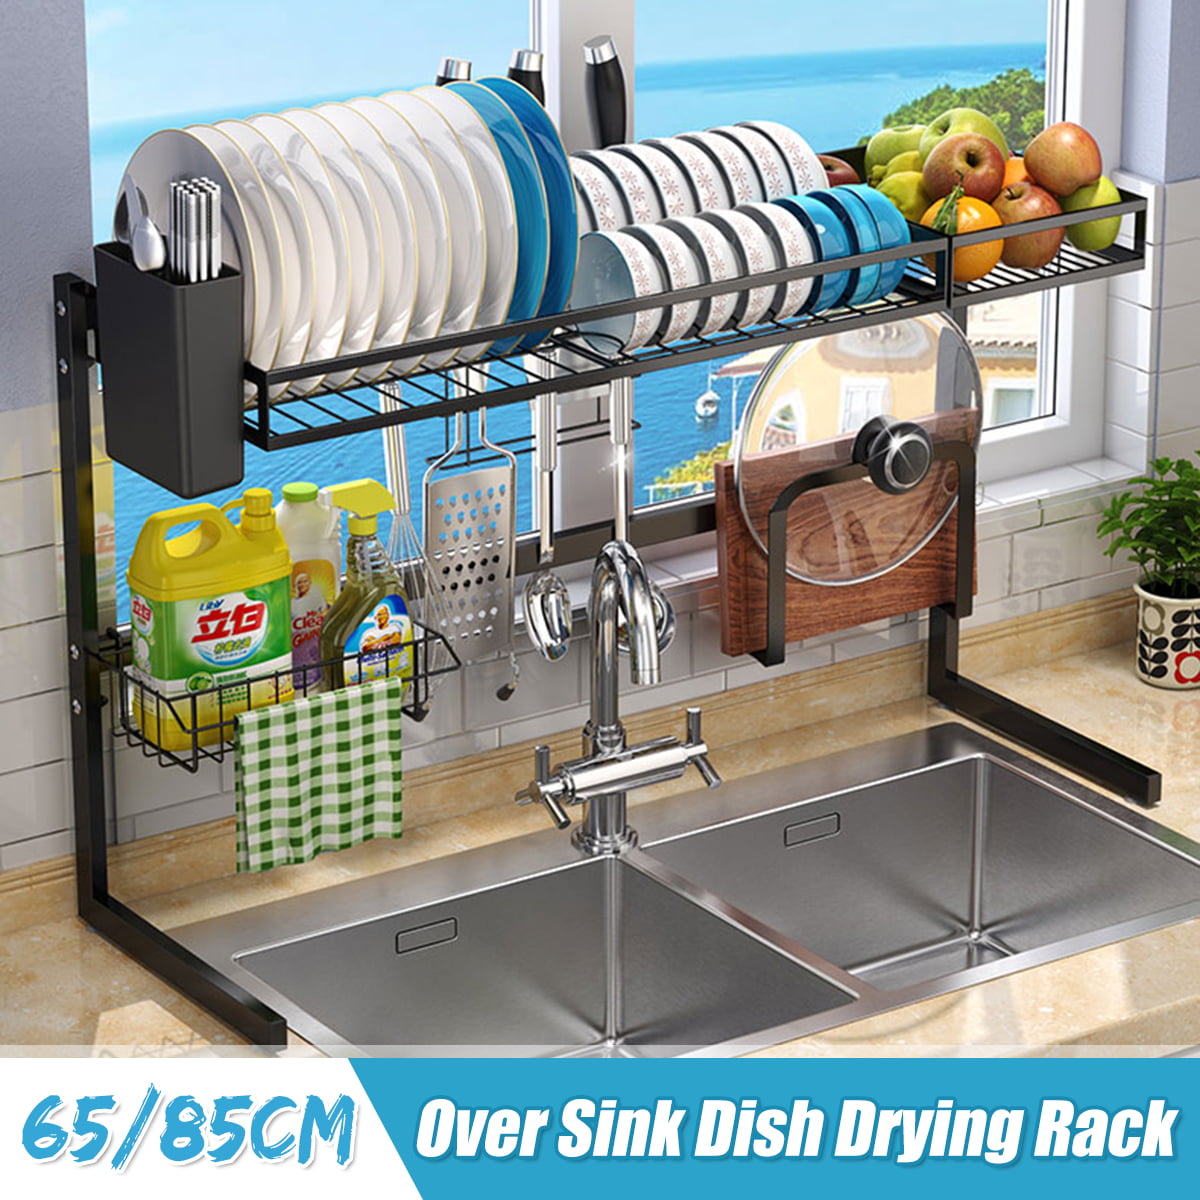 85cm Over Sink Dish Drying Rack Drainer Stainless Steel Kitchen Cutlery Holder 